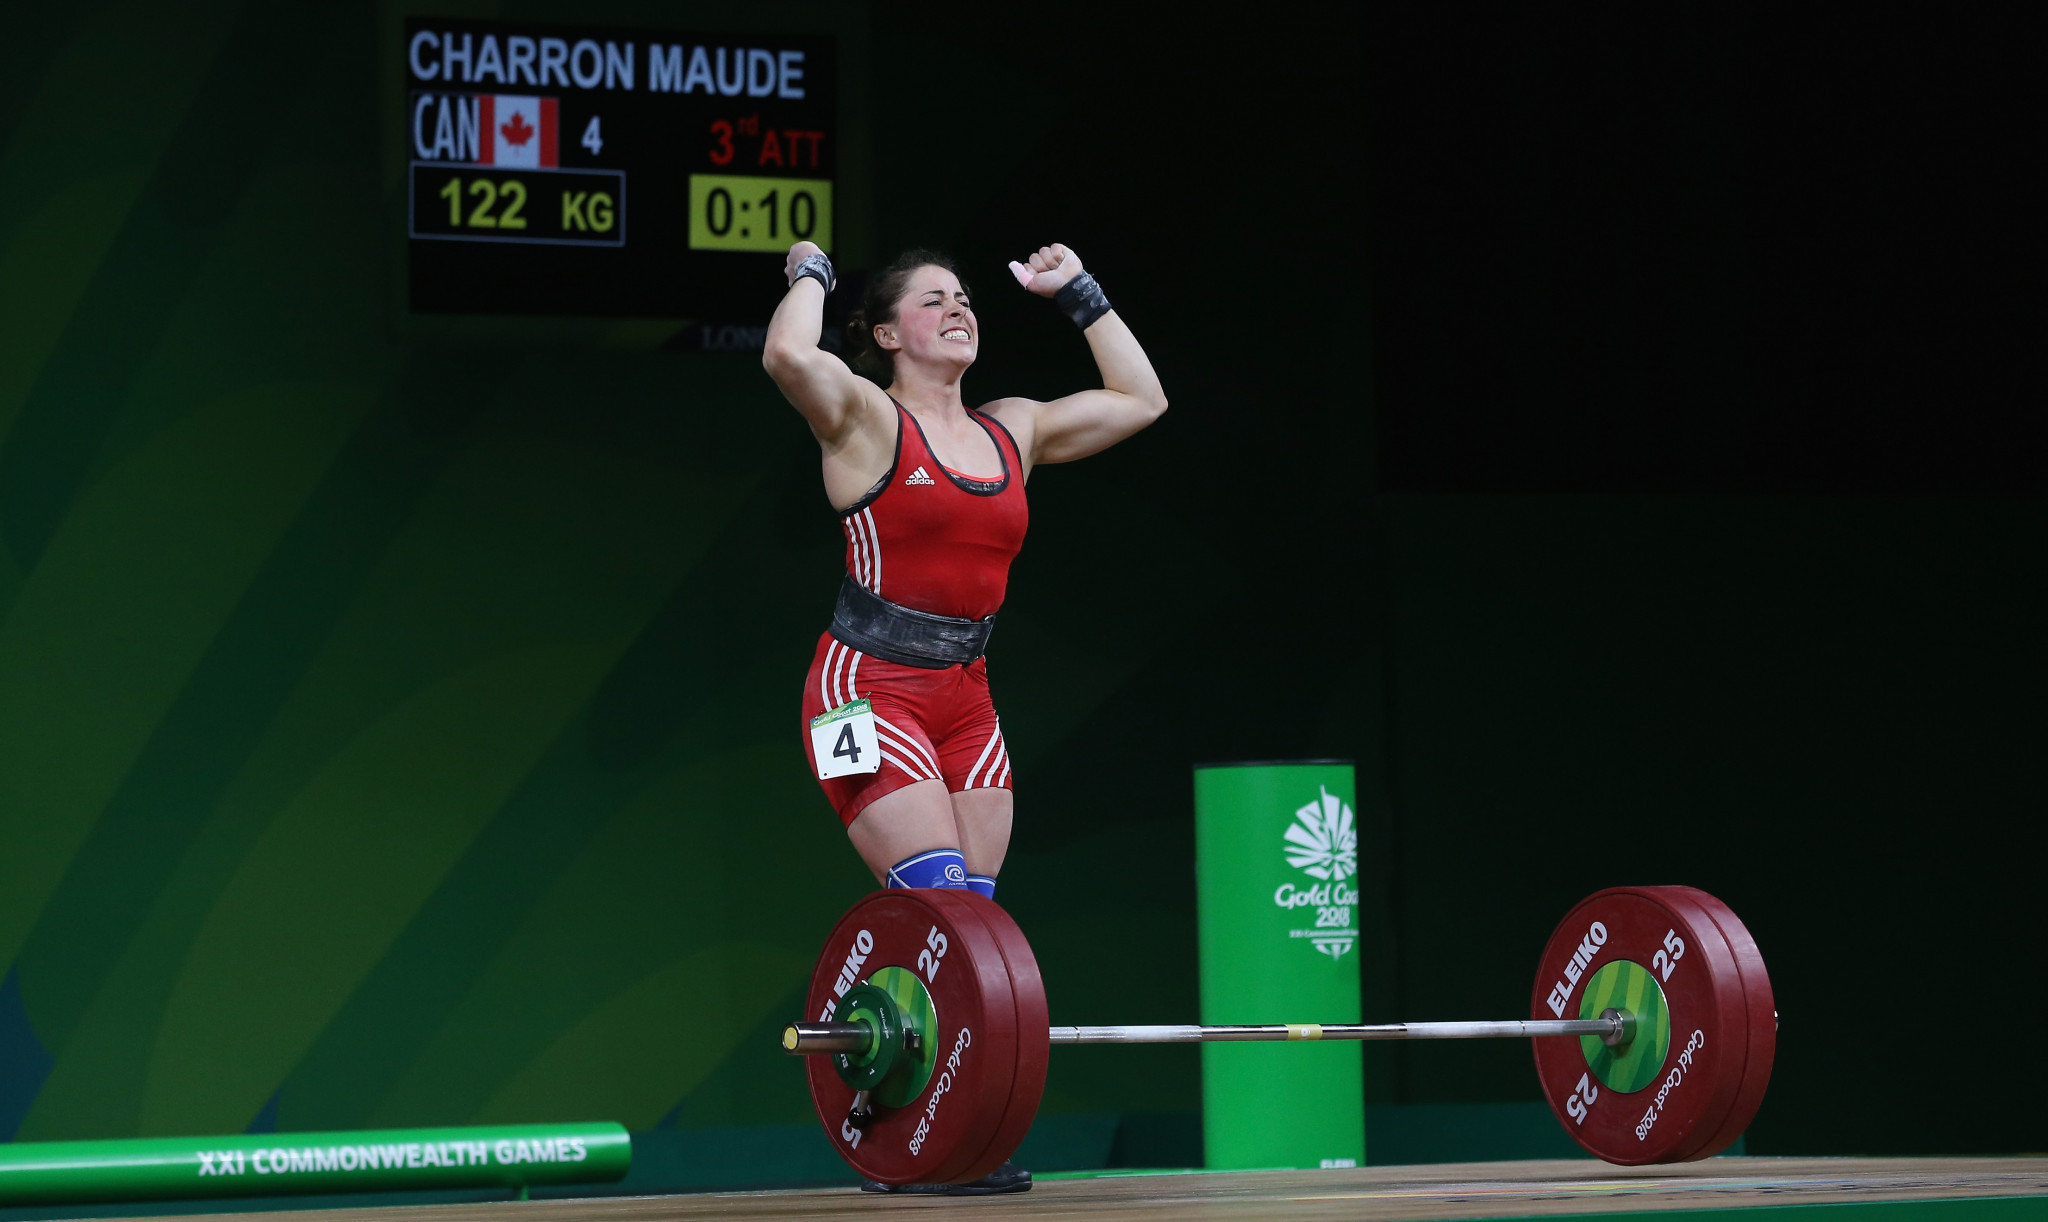 Canada’s Maude Charron broke the Commonwealth Games clean and jerk record after clinching victory in the women’s 63 kilograms weightlifting event today at Gold Coast 2018 ©Getty Images